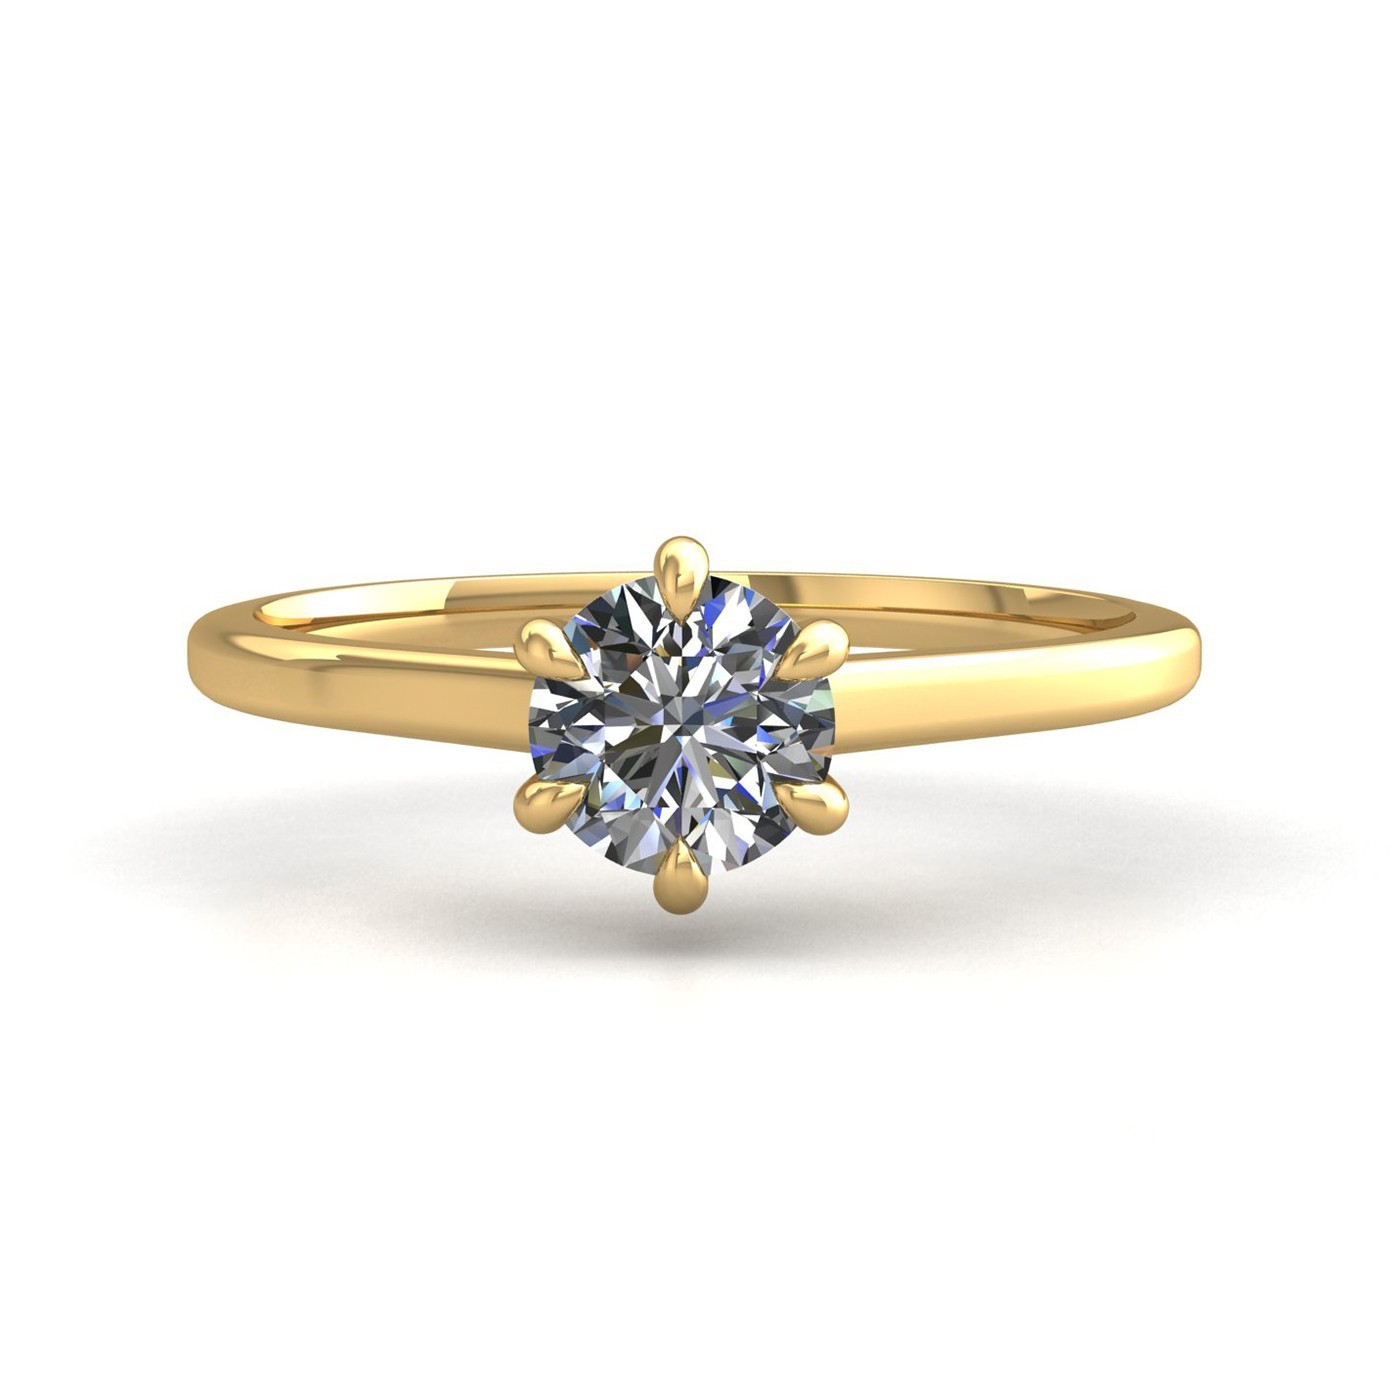 18k yellow gold 0,50 ct 6 prongs solitaire round cut diamond engagement ring with whisper thin band Photos & images